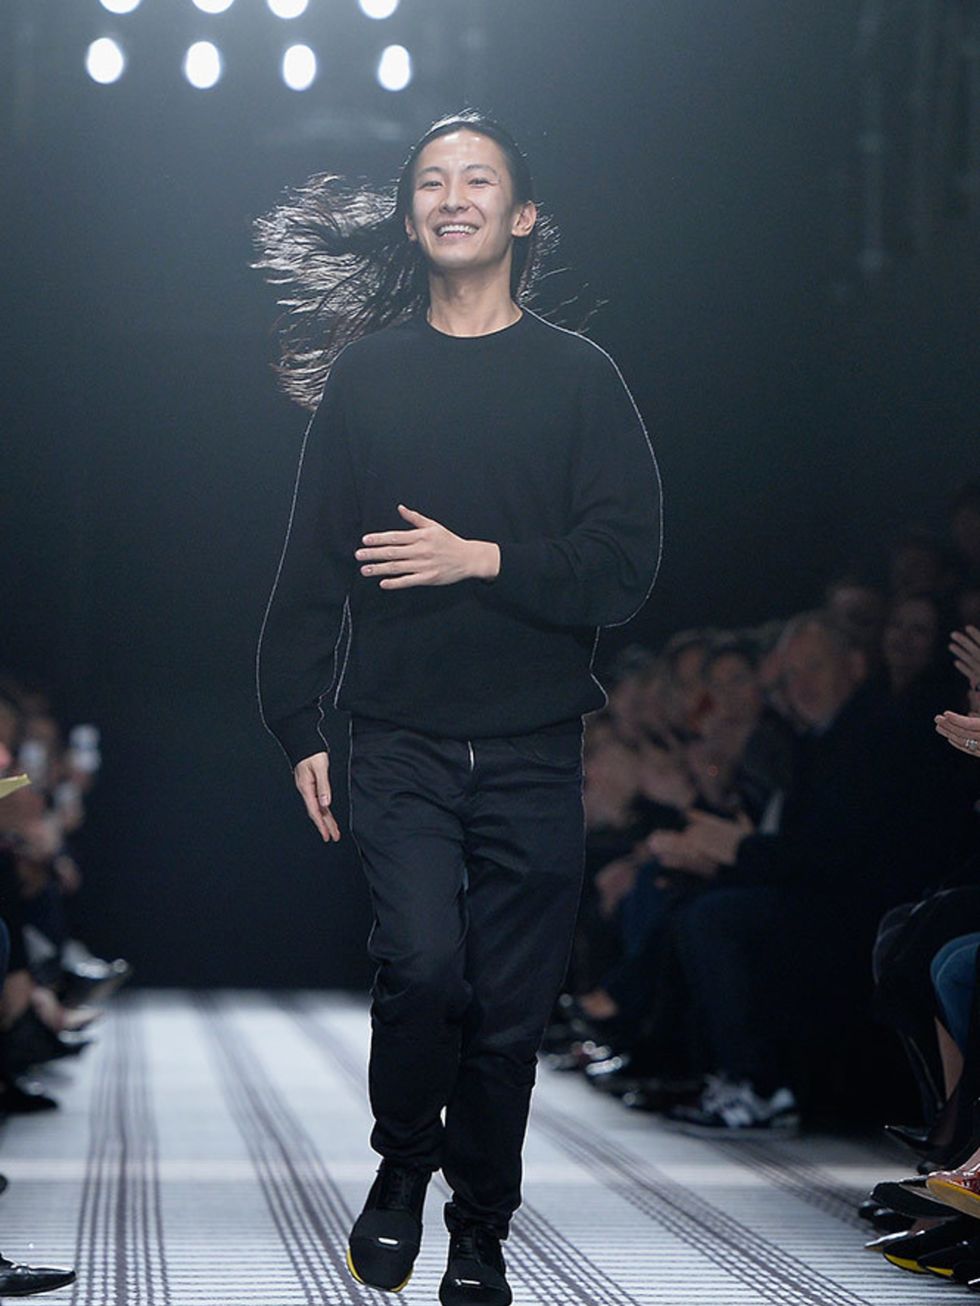 <p><a href="http://www.elleuk.com/tags/alexander-wang" target="_blank">ALEXANDER WANG</a></p>

<p>Saturday will see Wang take the stage with a lot to prove, post-announcement that he&rsquo;s leaving his other gig, Balenciaga. Will we see his eponymous lab